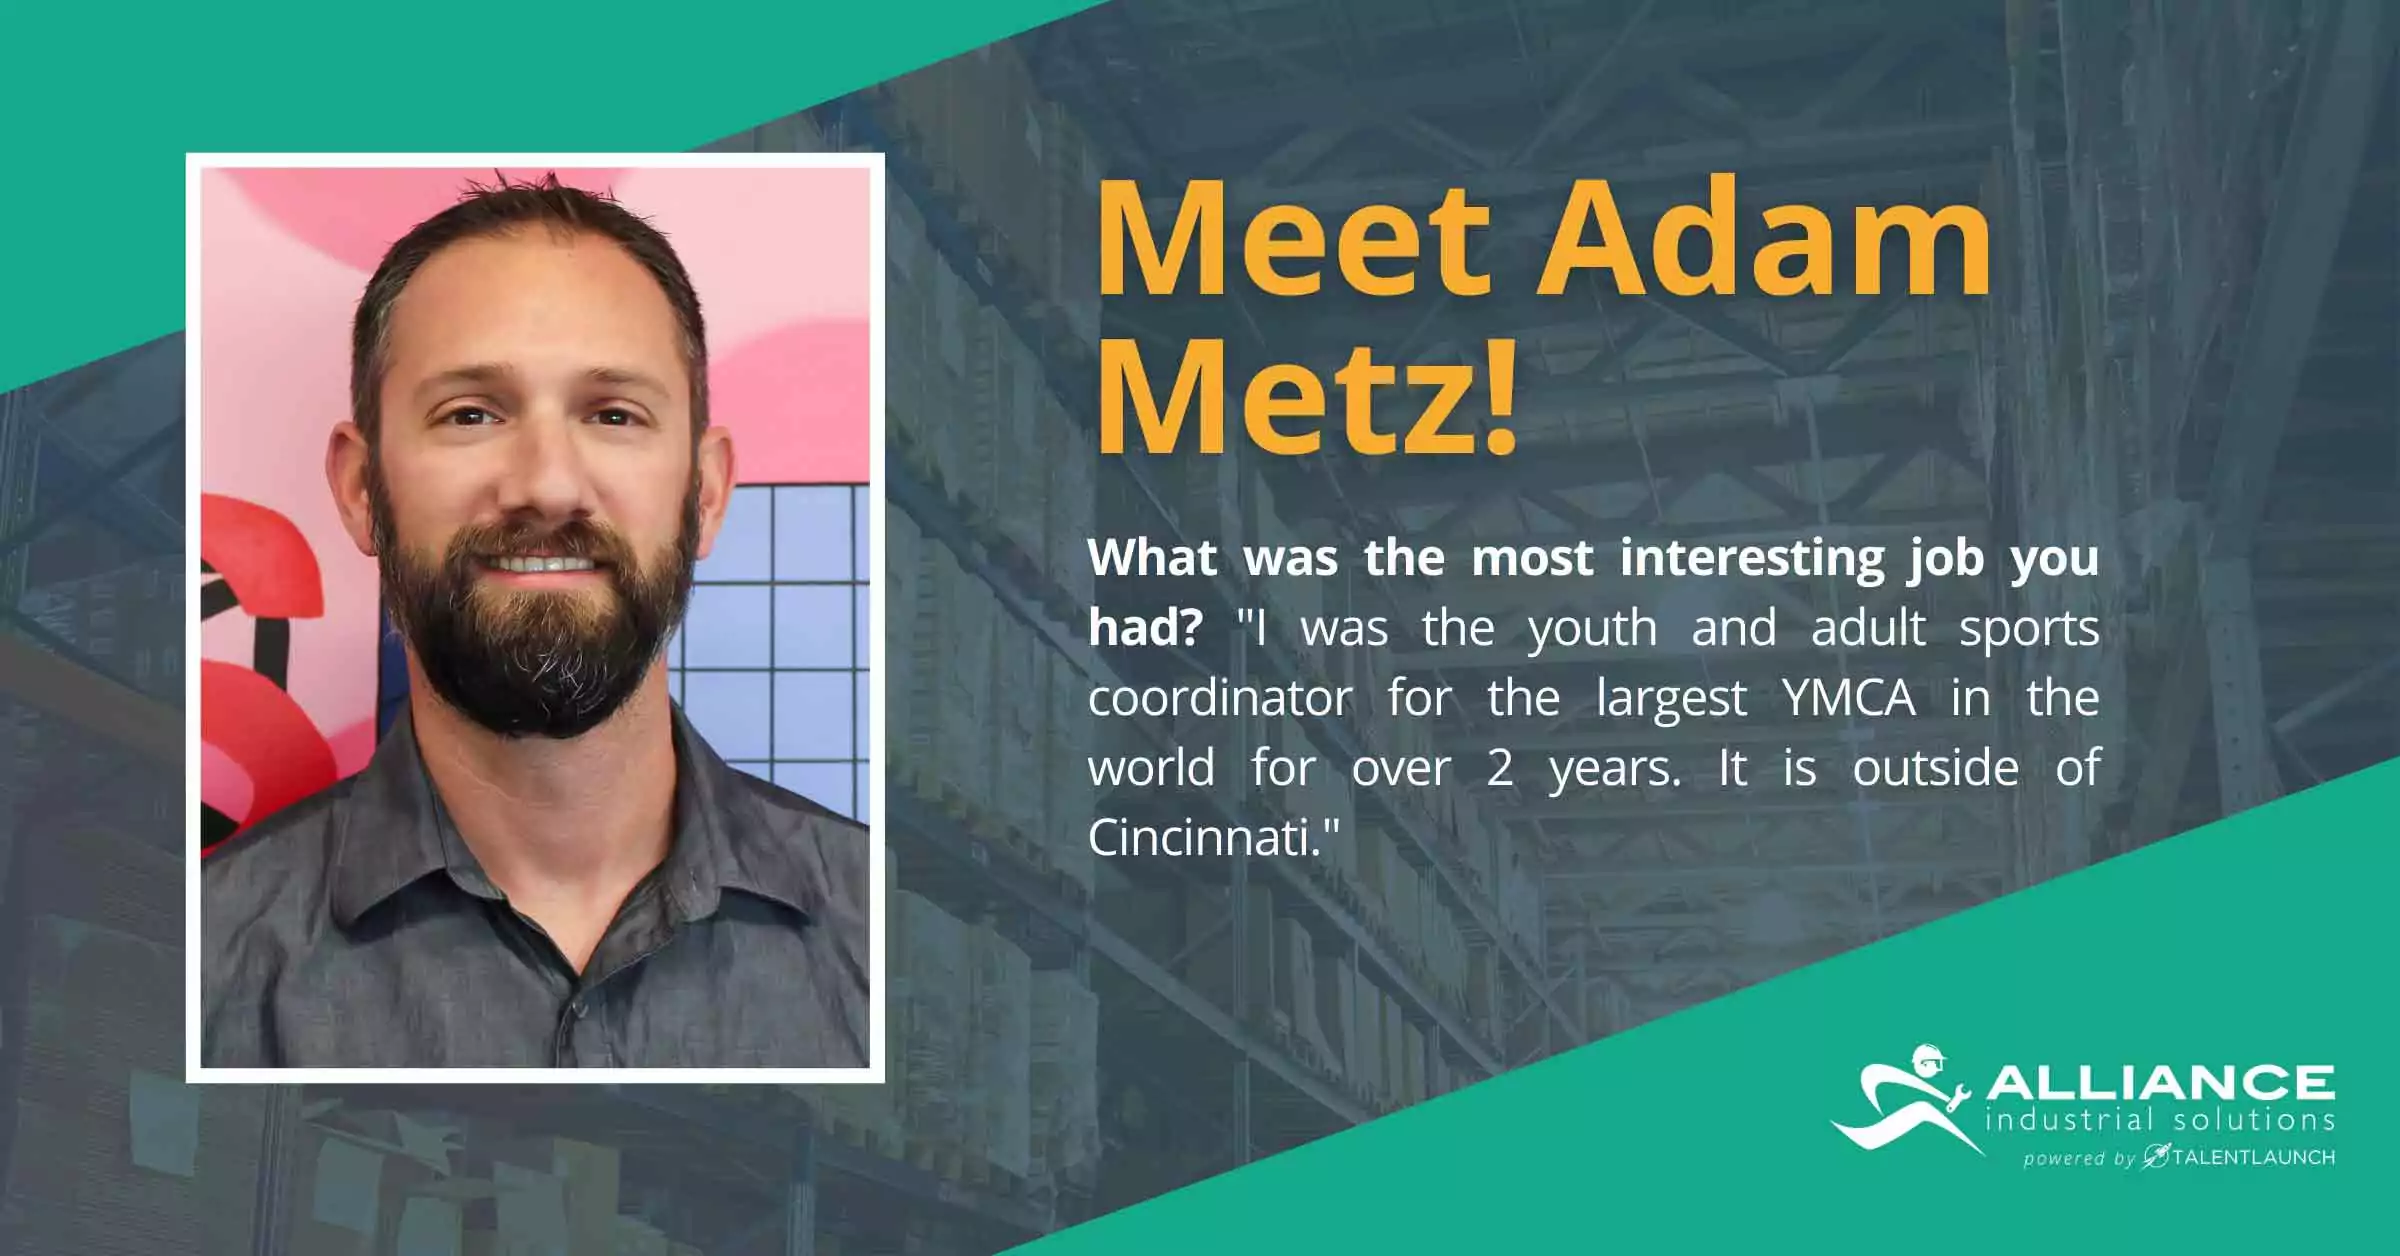 AIS Employee Spotlight, Adam Metz is a Senior Account Manager with Alliance Industrial